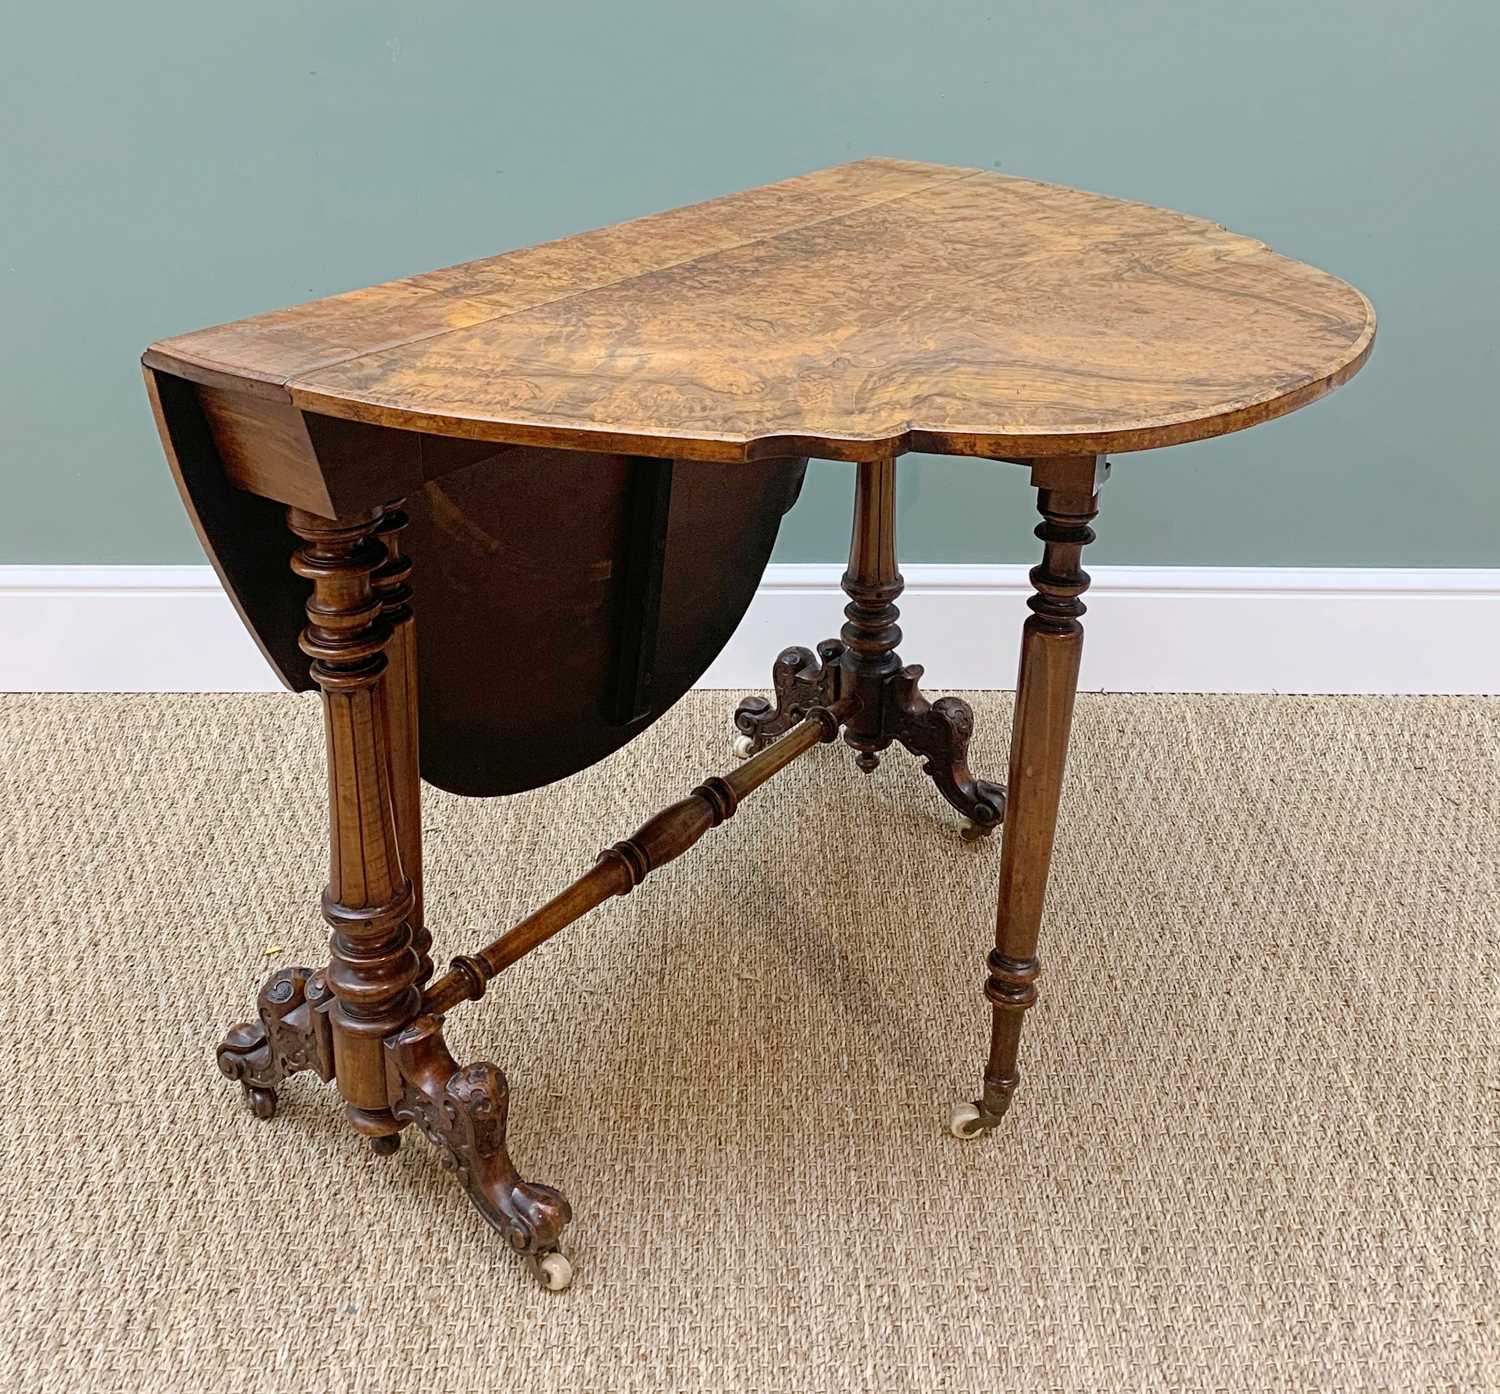 MID VICTORIAN BURR-WALNUT SUTHERLAND TABLE, shaped top over column suppports with blind fret - Image 4 of 6